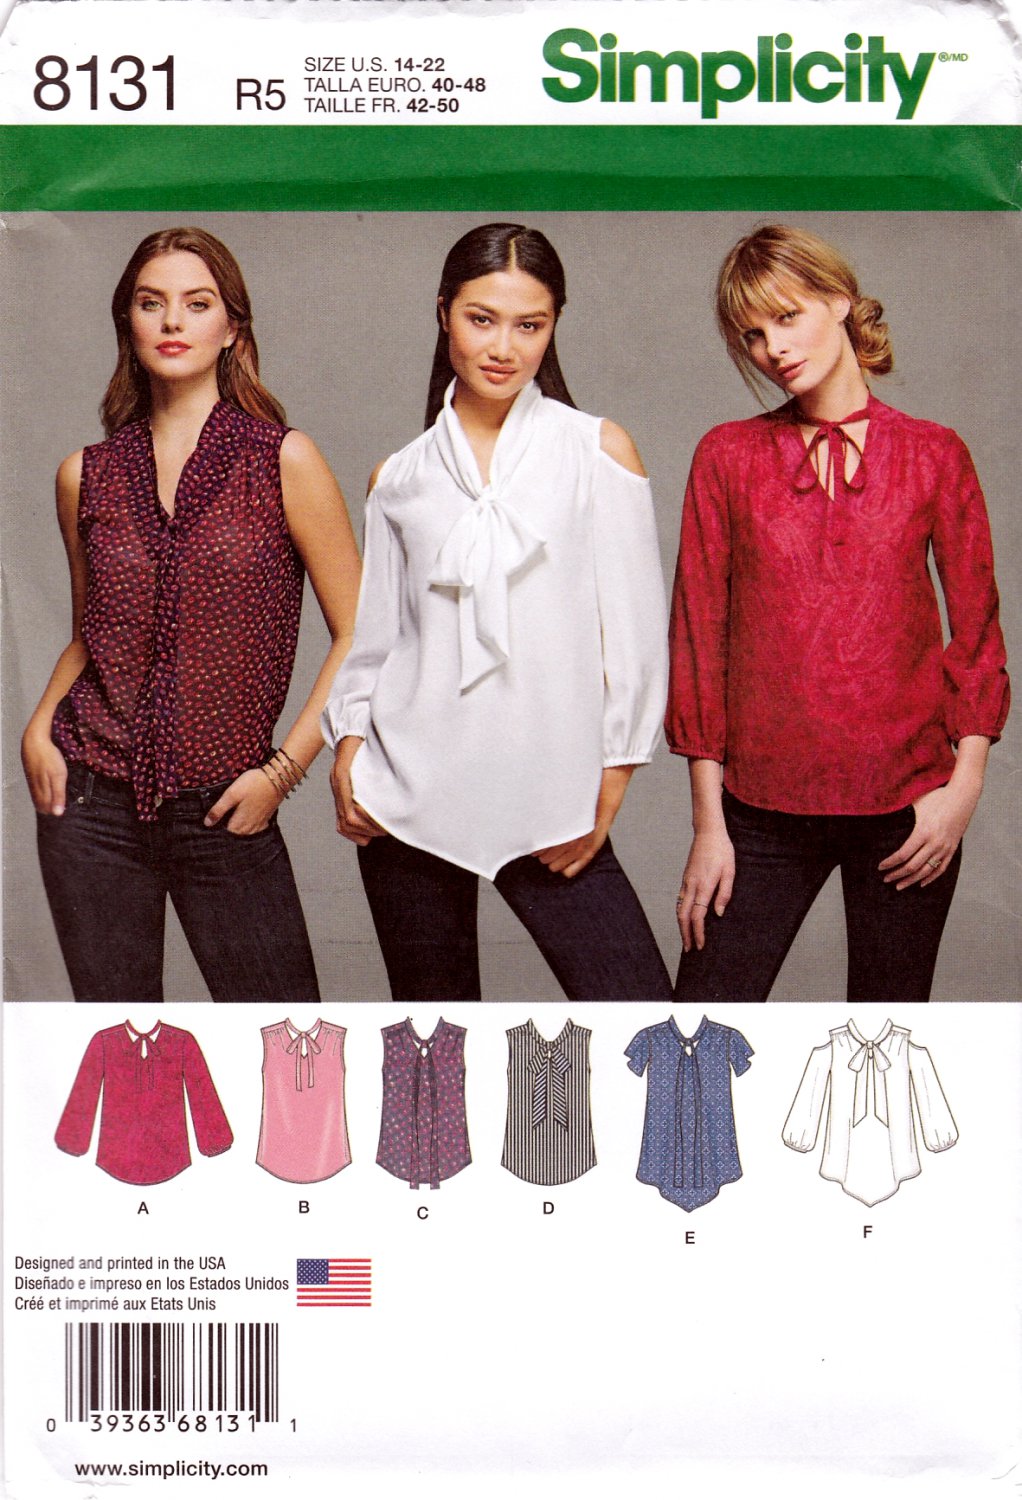 Simplicity 8131 Misses Pullover Blouses Sleeve and Bow Variations Sewing Pattern Sizes 14-22